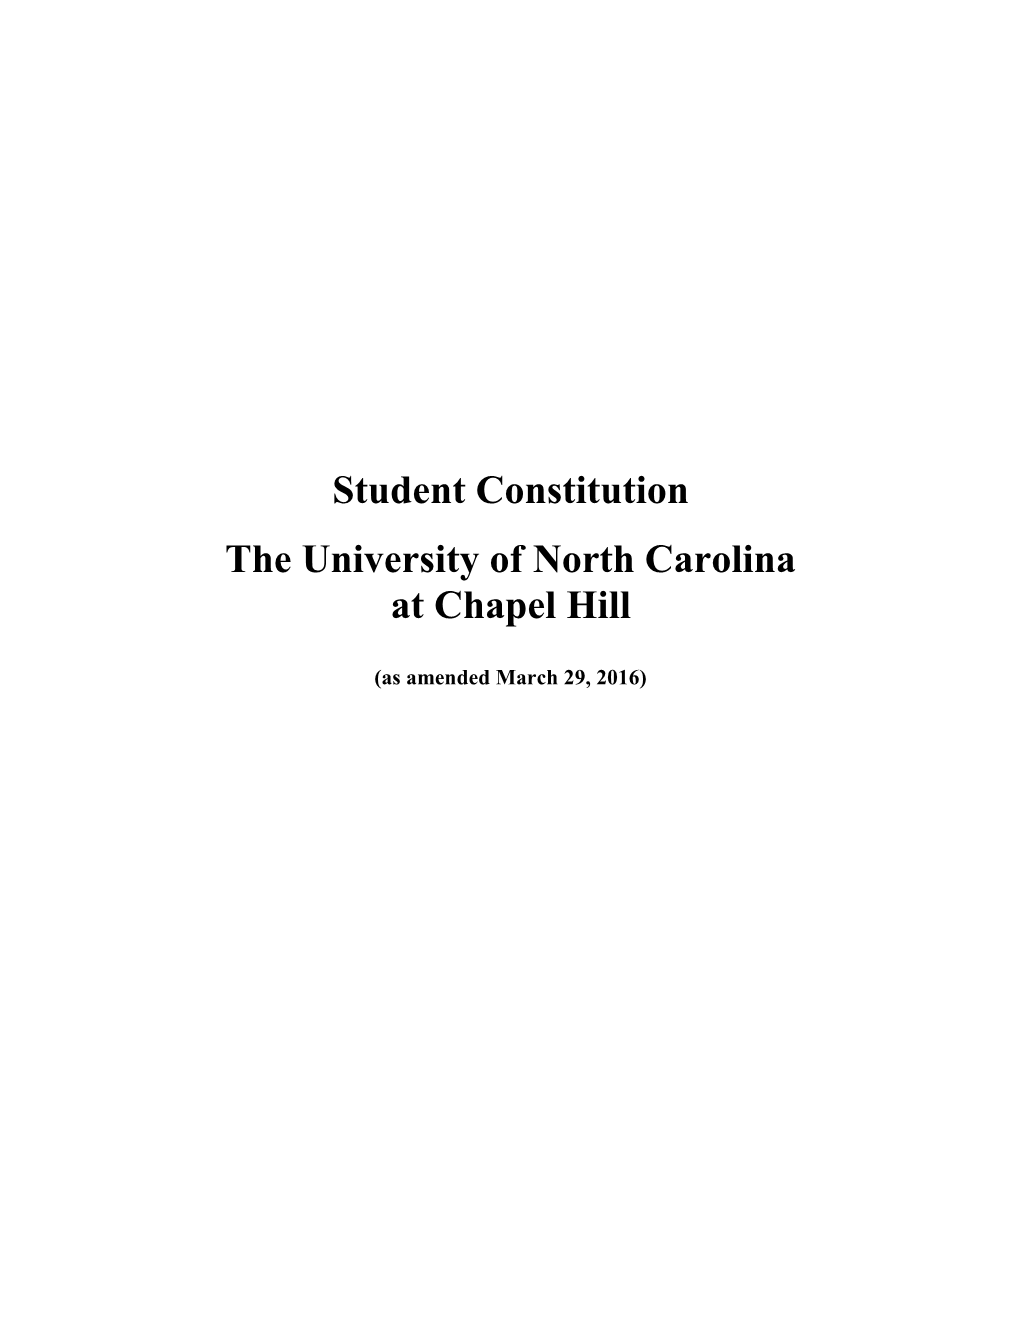 Student Constitution the University of North Carolina at Chapel Hill